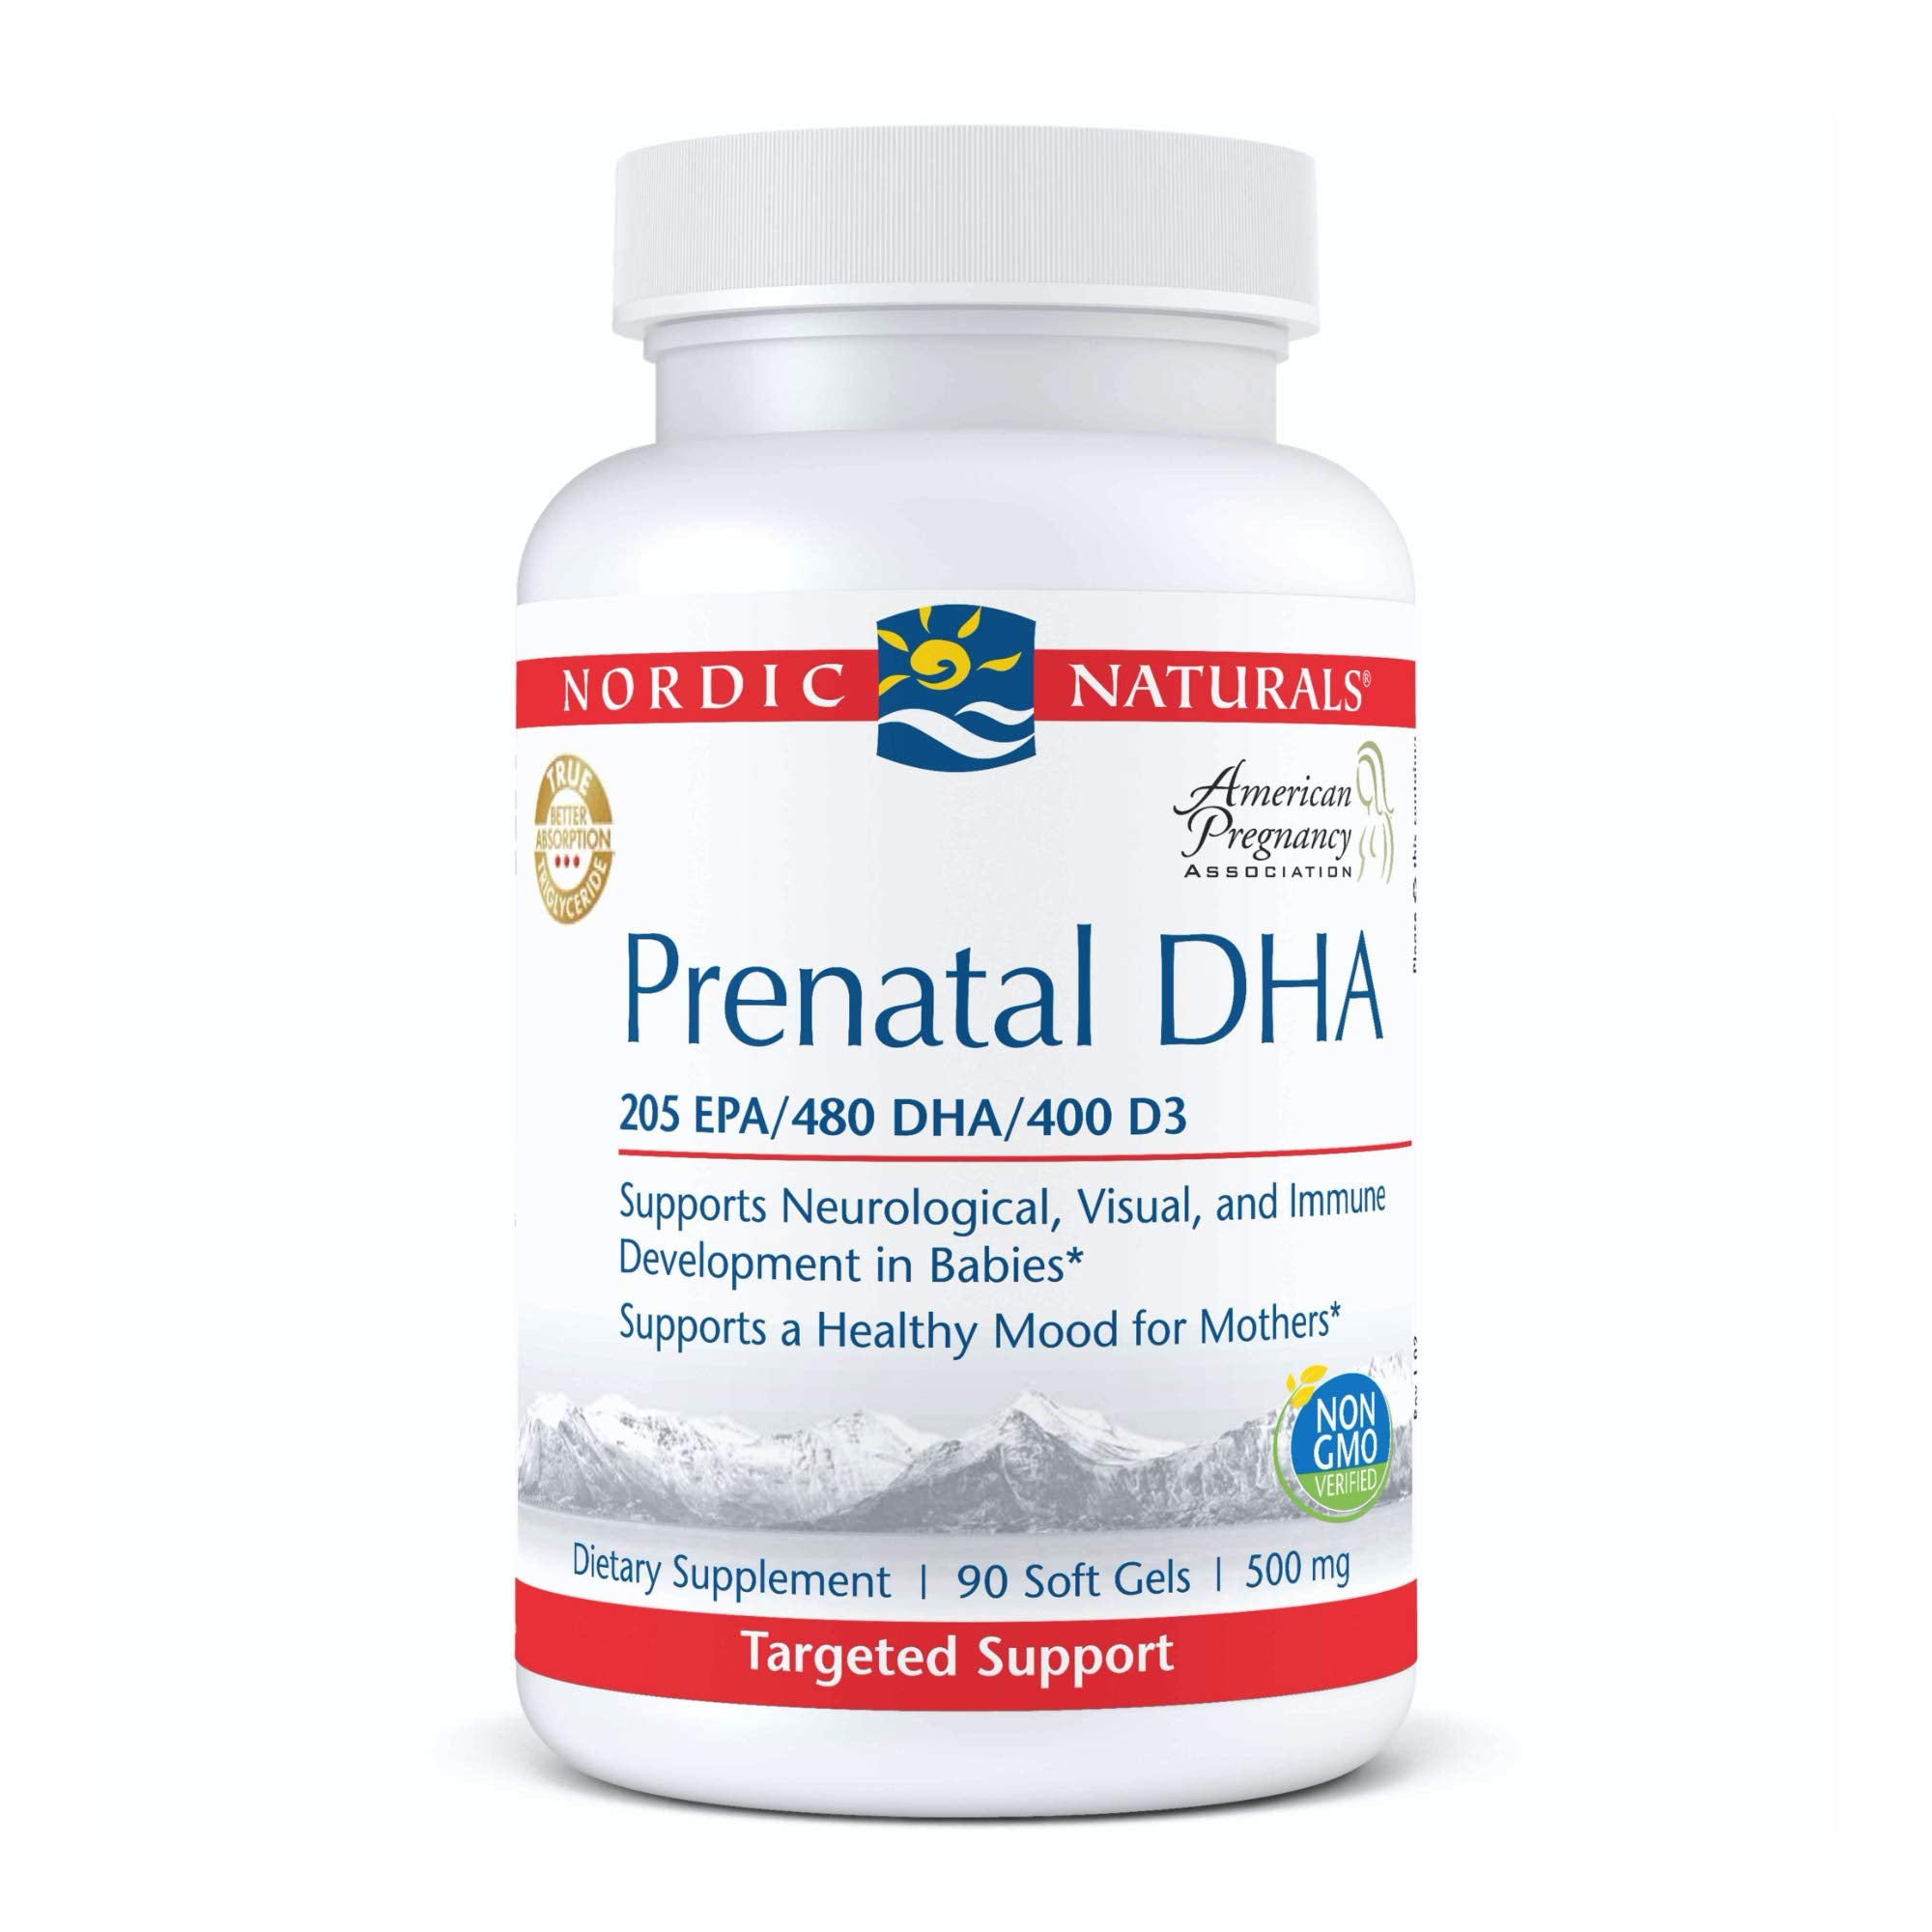 Nordic Naturals Prenatal DHA, Unflavored - 830 mg Omega-3 + 400 IU Vitamin D3 - 90 Soft Gels - Supports Brain Development in Babies During Pregnancy & Lactation - Non-GMO - 45 Servings